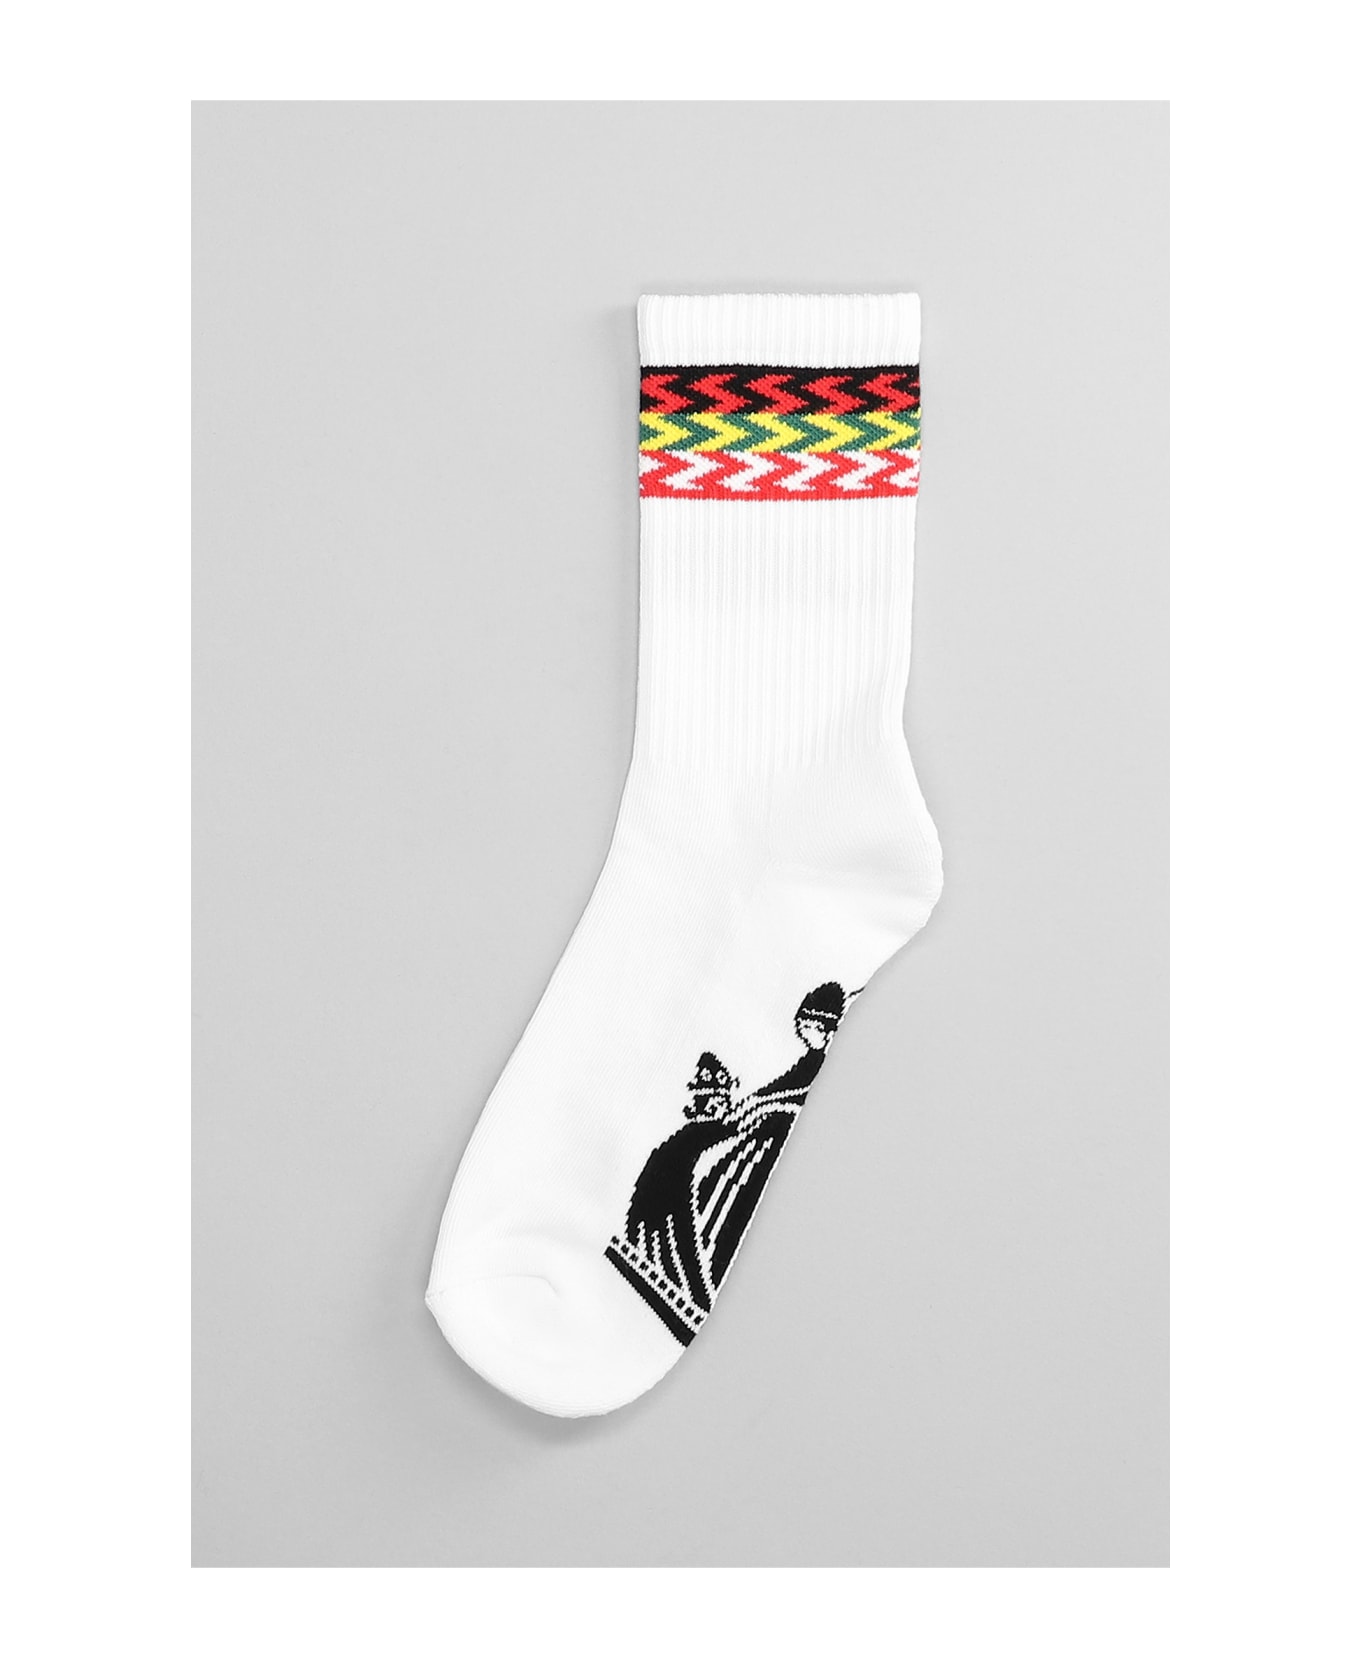 Lanvin Socks In Black And White Cotton - black and white 靴下